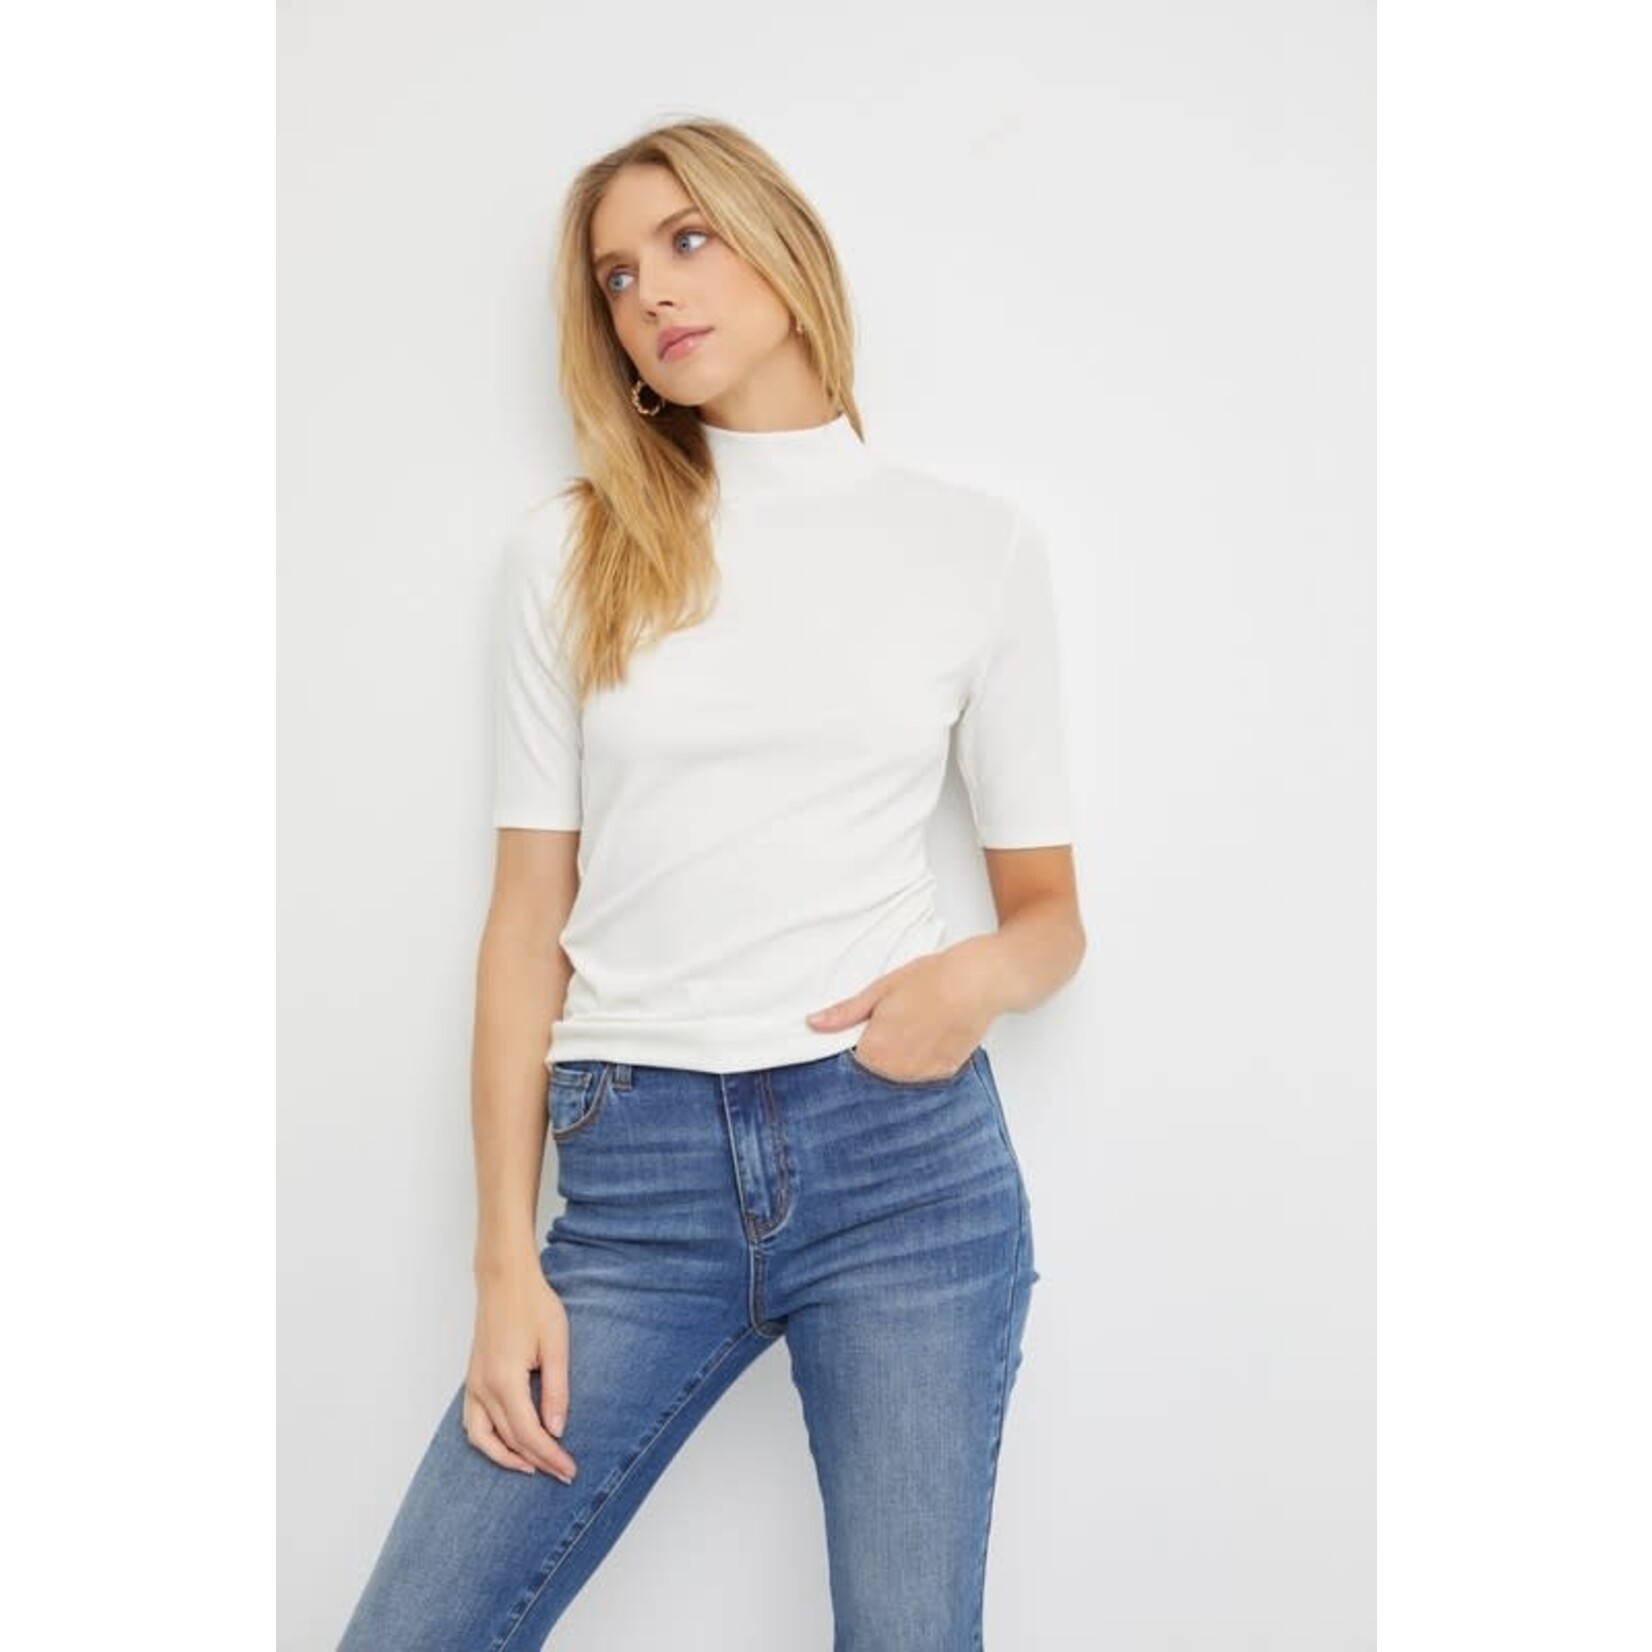 Be Cool Ruby Turtle Neck Top